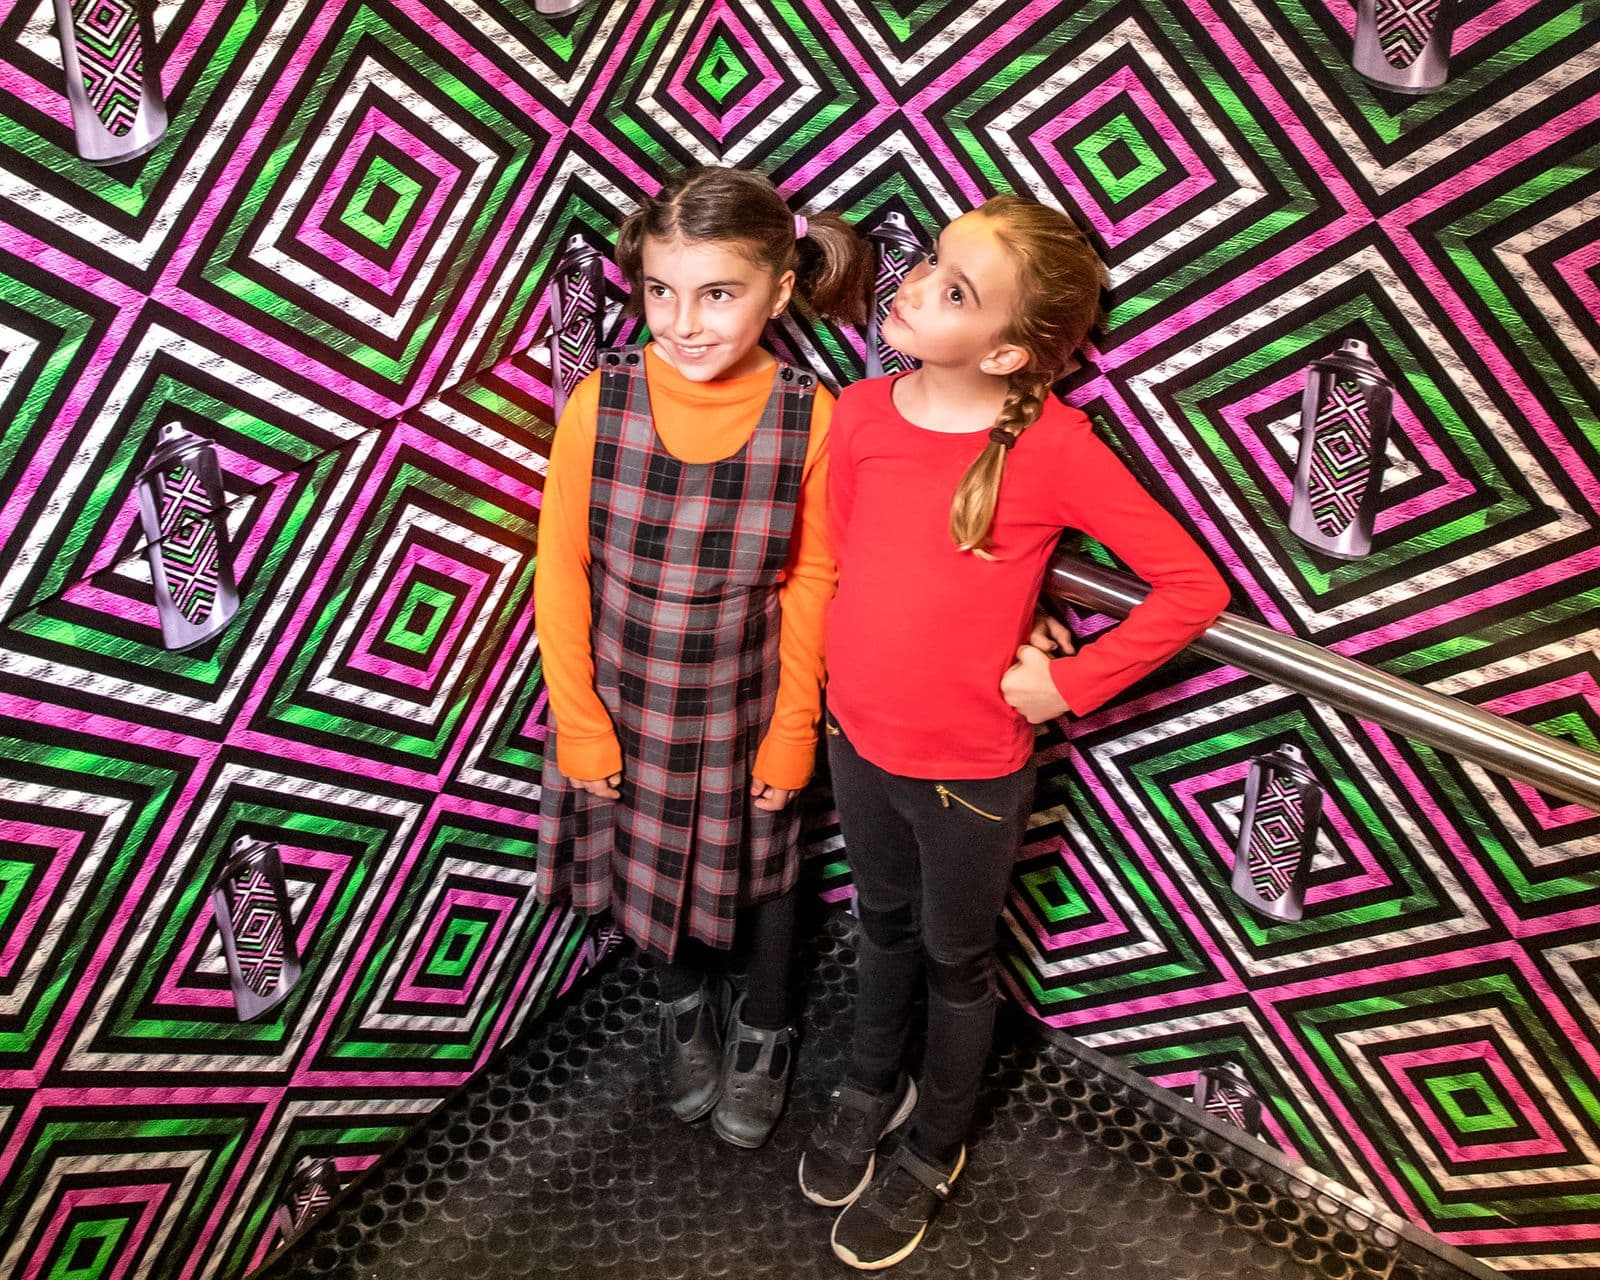 Photograph of two girls in colourful patterned elevator